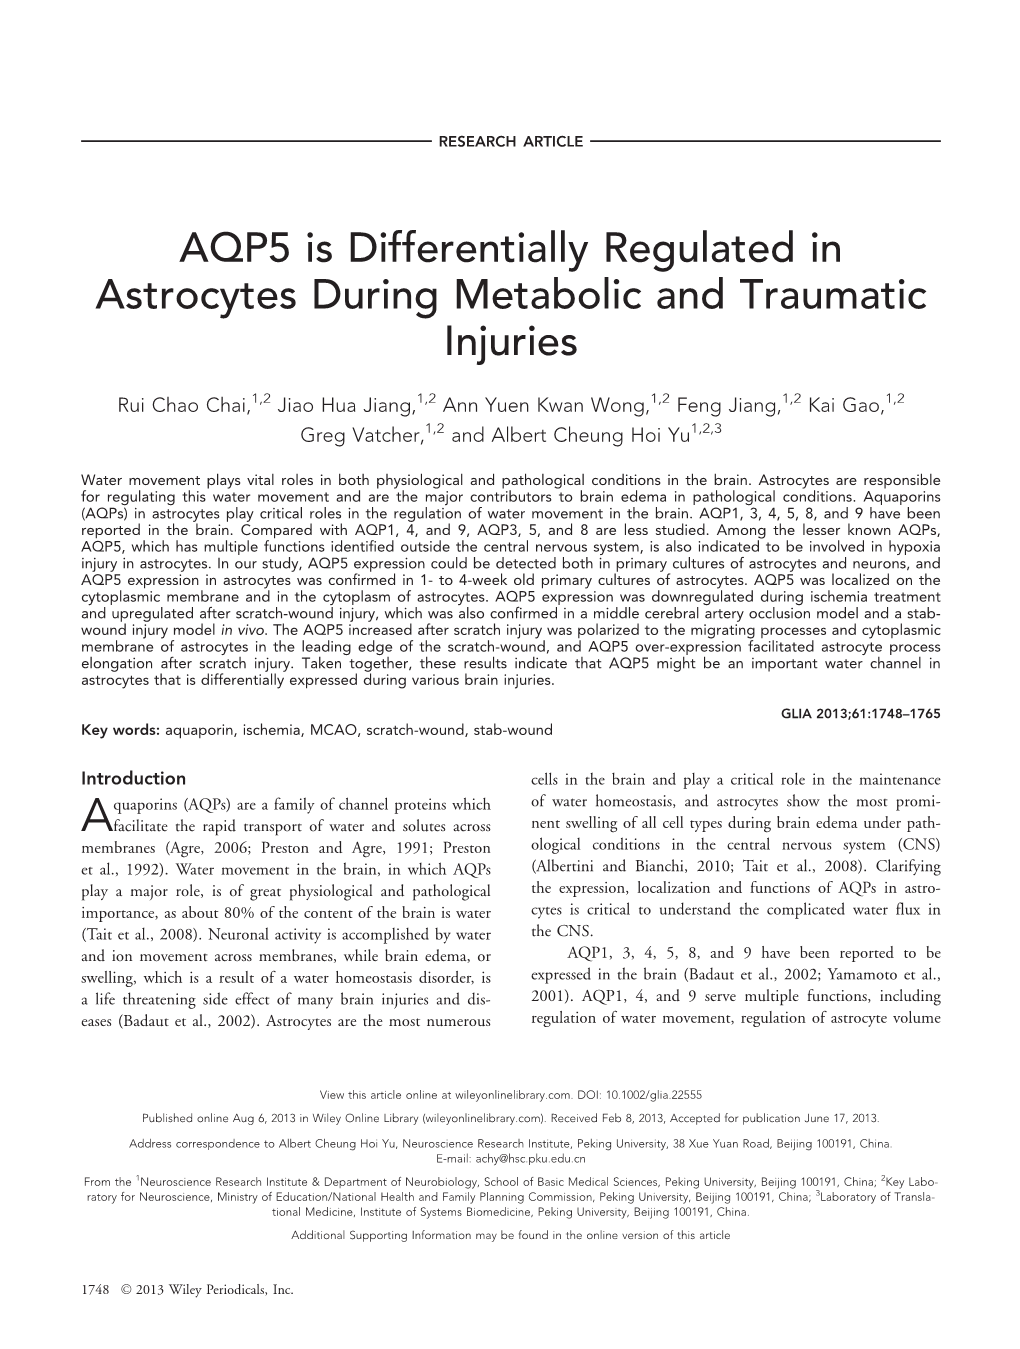 AQP5 Is Differentially Regulated in Astrocytes During Metabolic and Traumatic Injuries